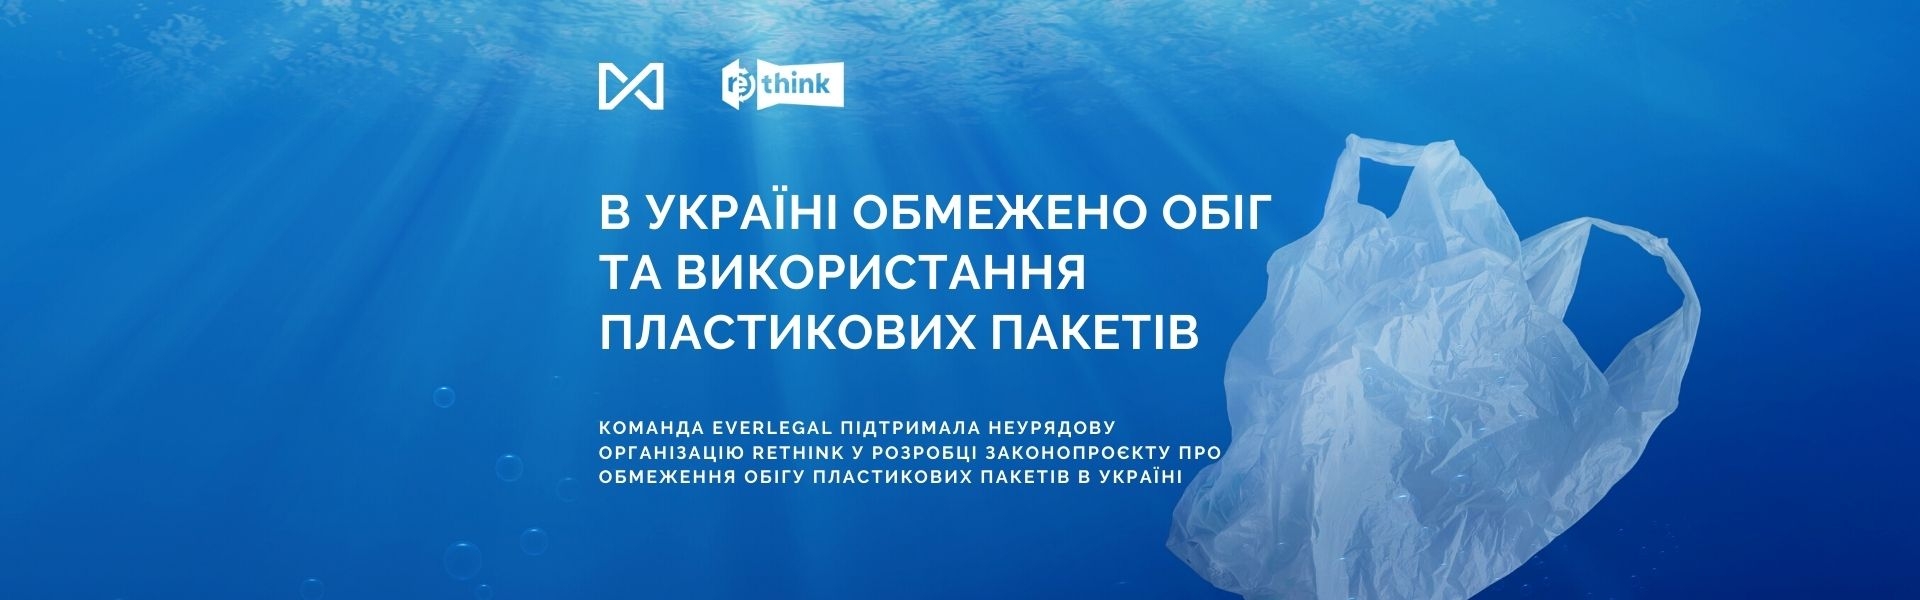 Limited distribution and use of plastic bags in Ukraine!